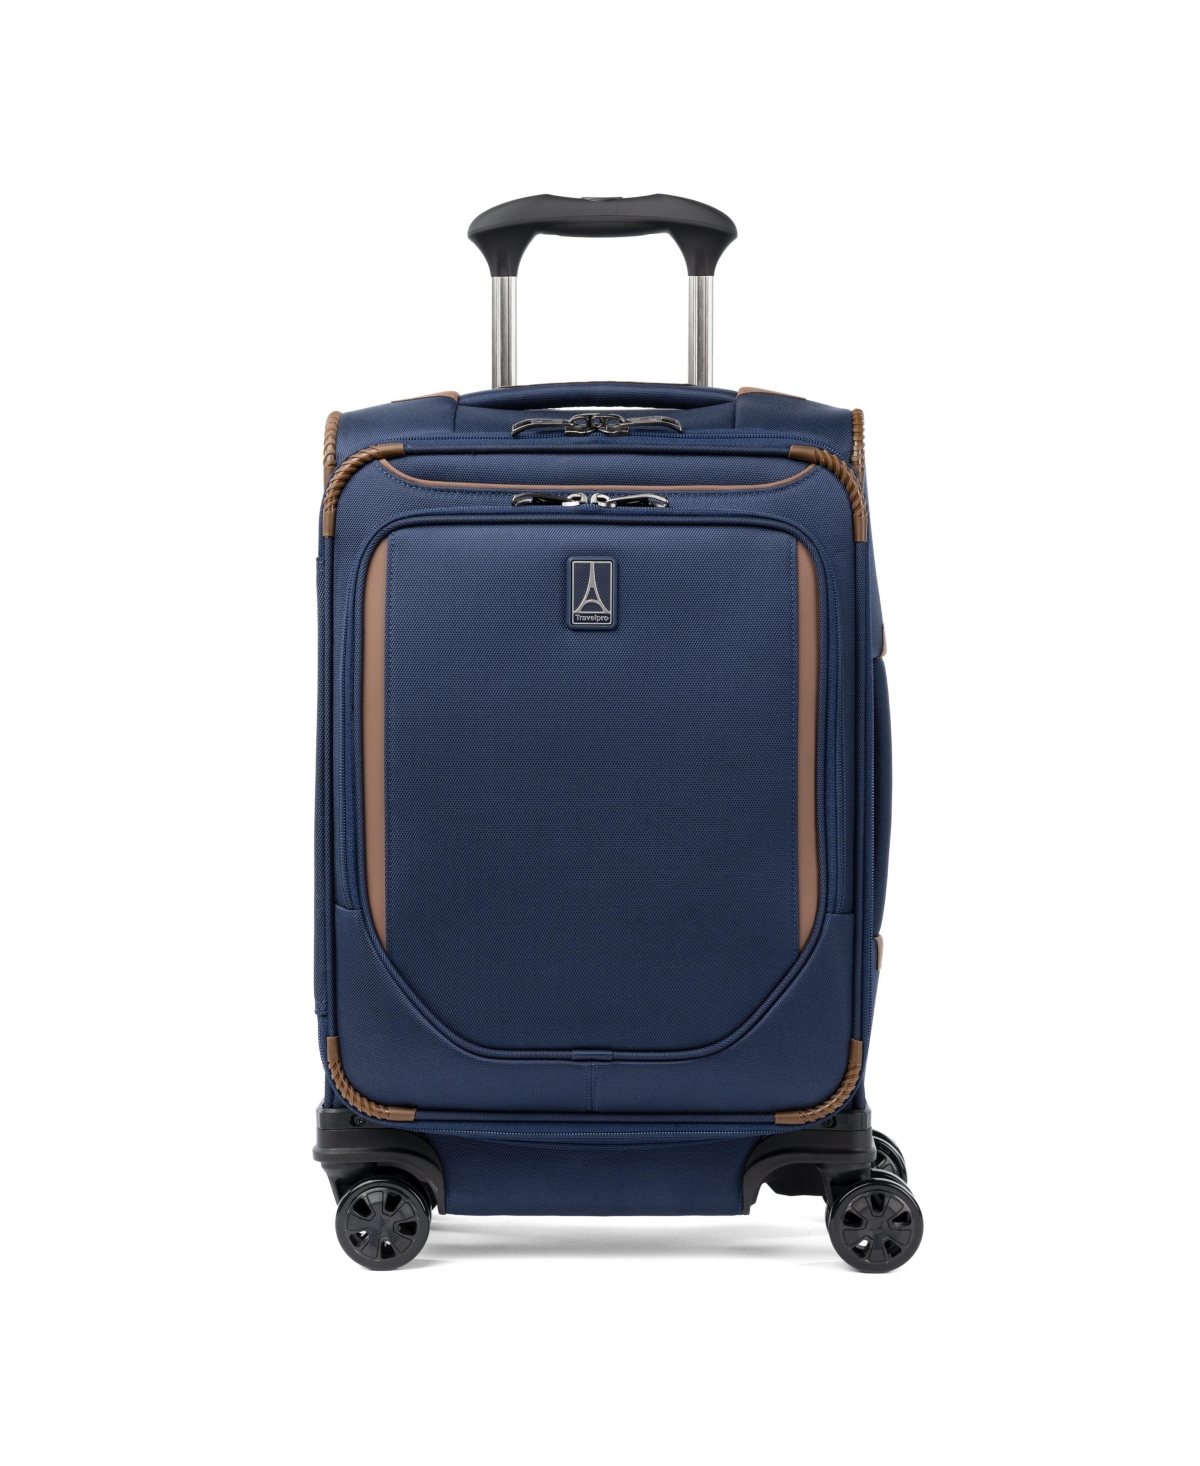 New! Travelpro Crew Classic Compact Carry-on Expandable Spinner Luggage - Patriot Blue